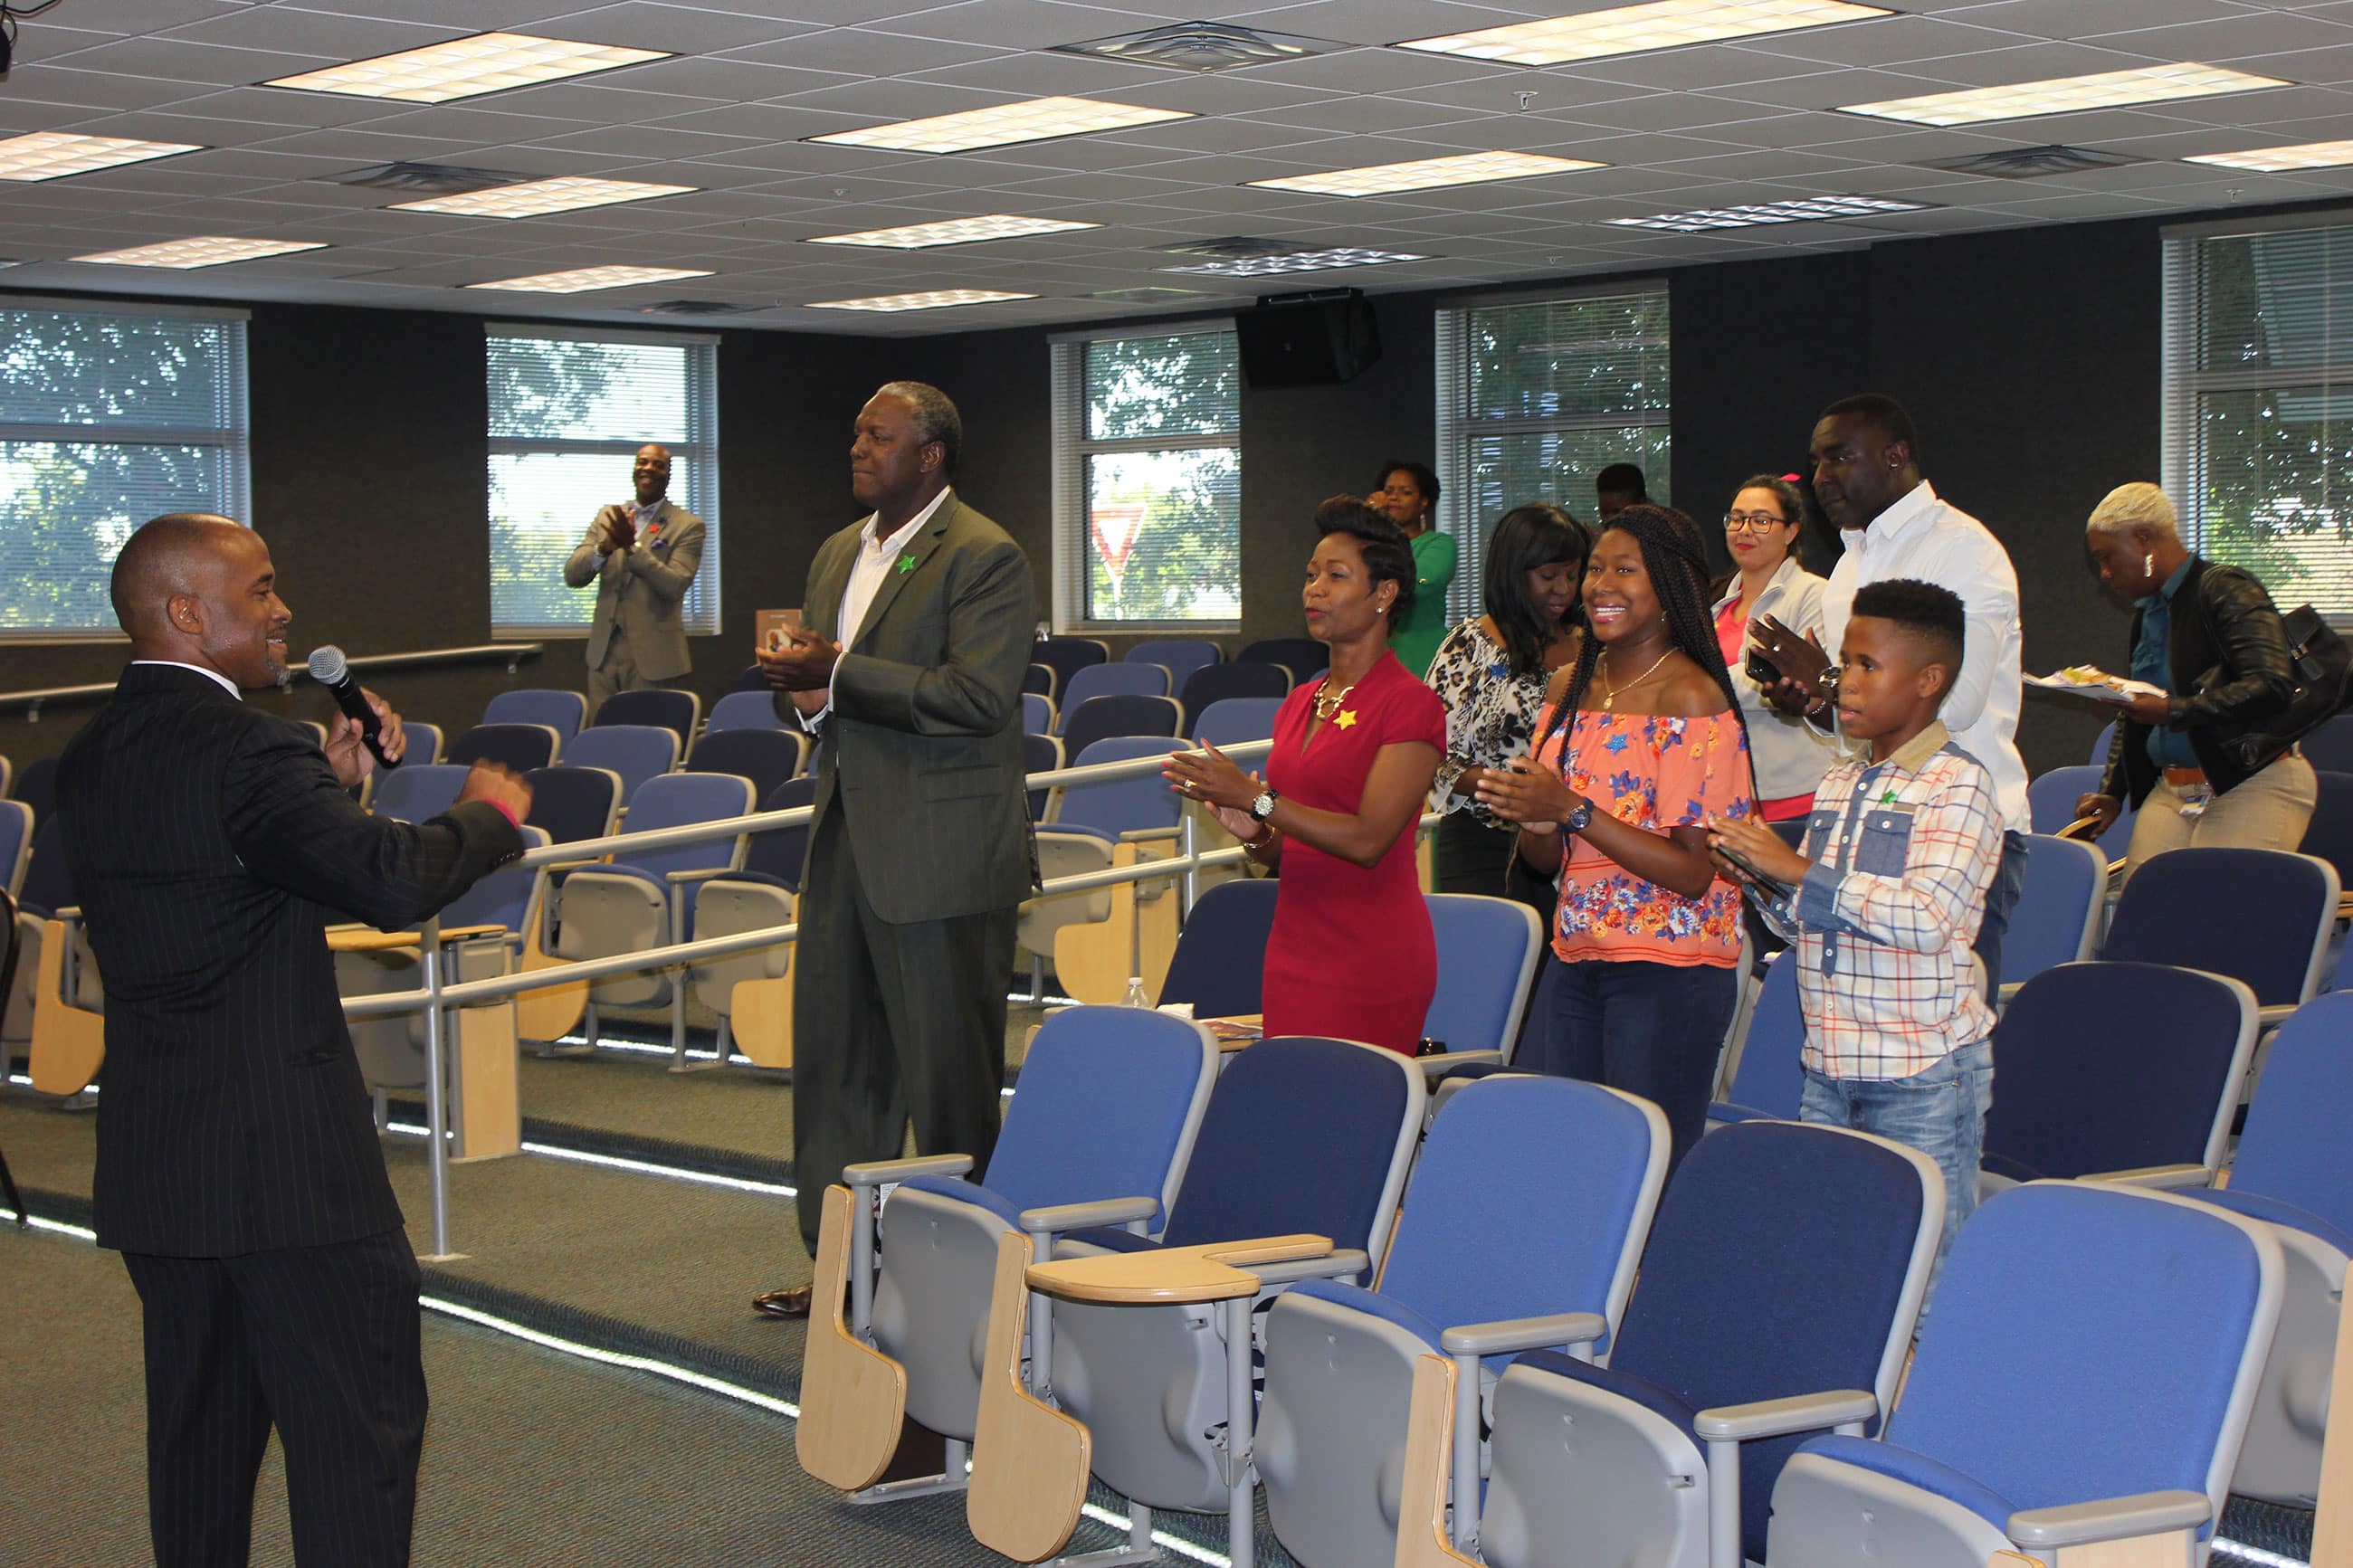 Pembroke Pines Campus finds “Time 2 Shine” at Empowerment Seminar